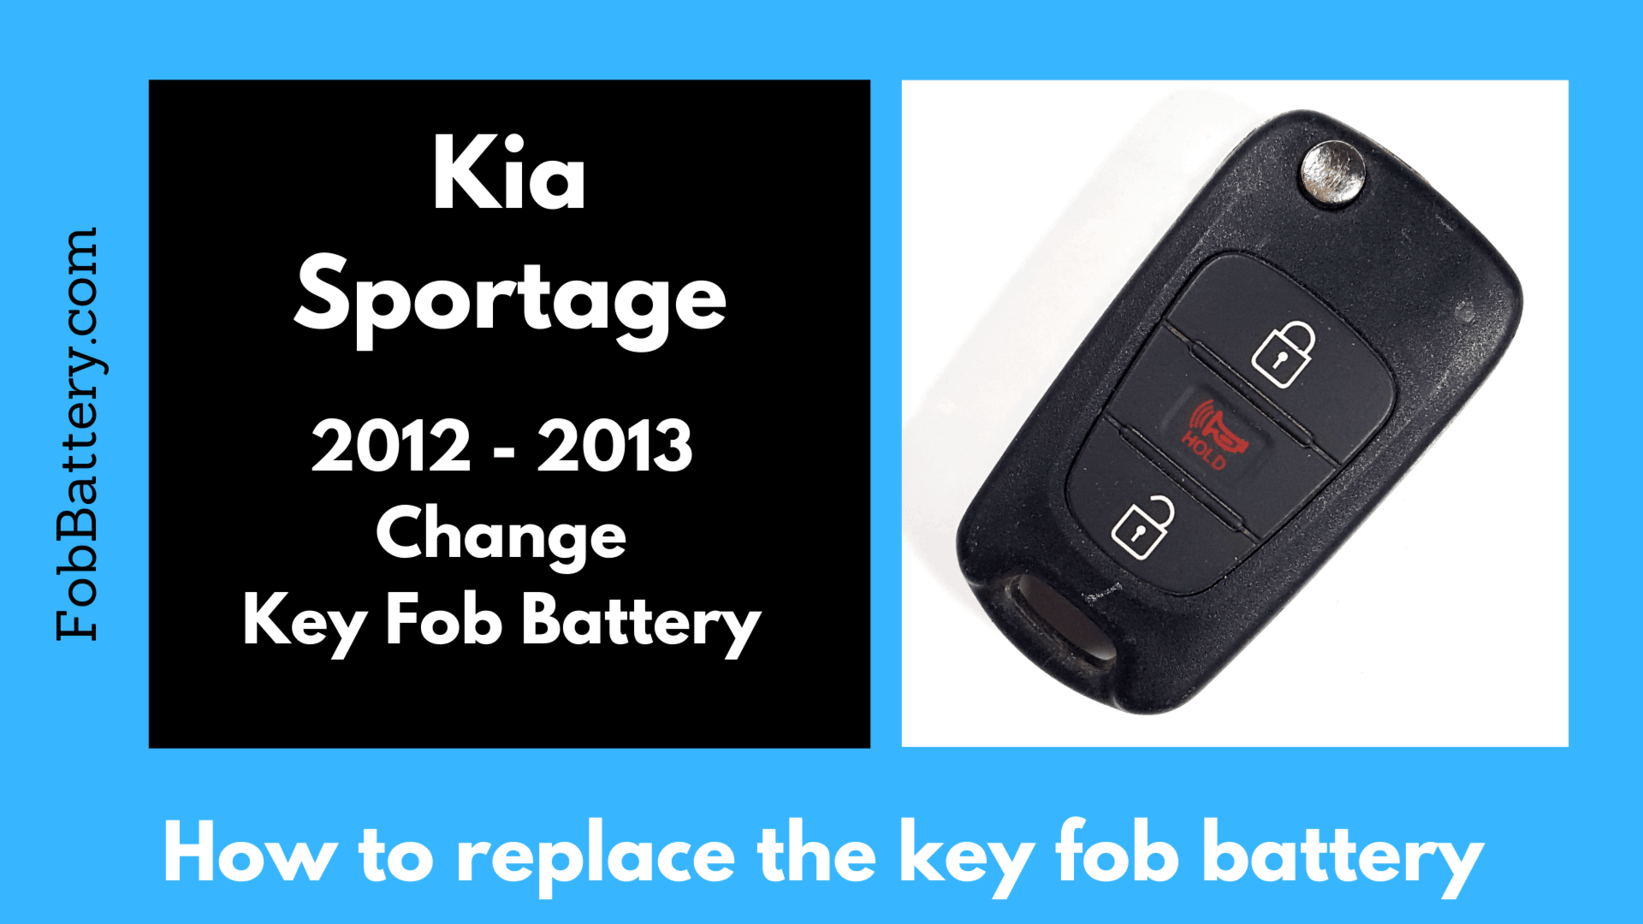 Kia Sportage key fob battery replacement guide